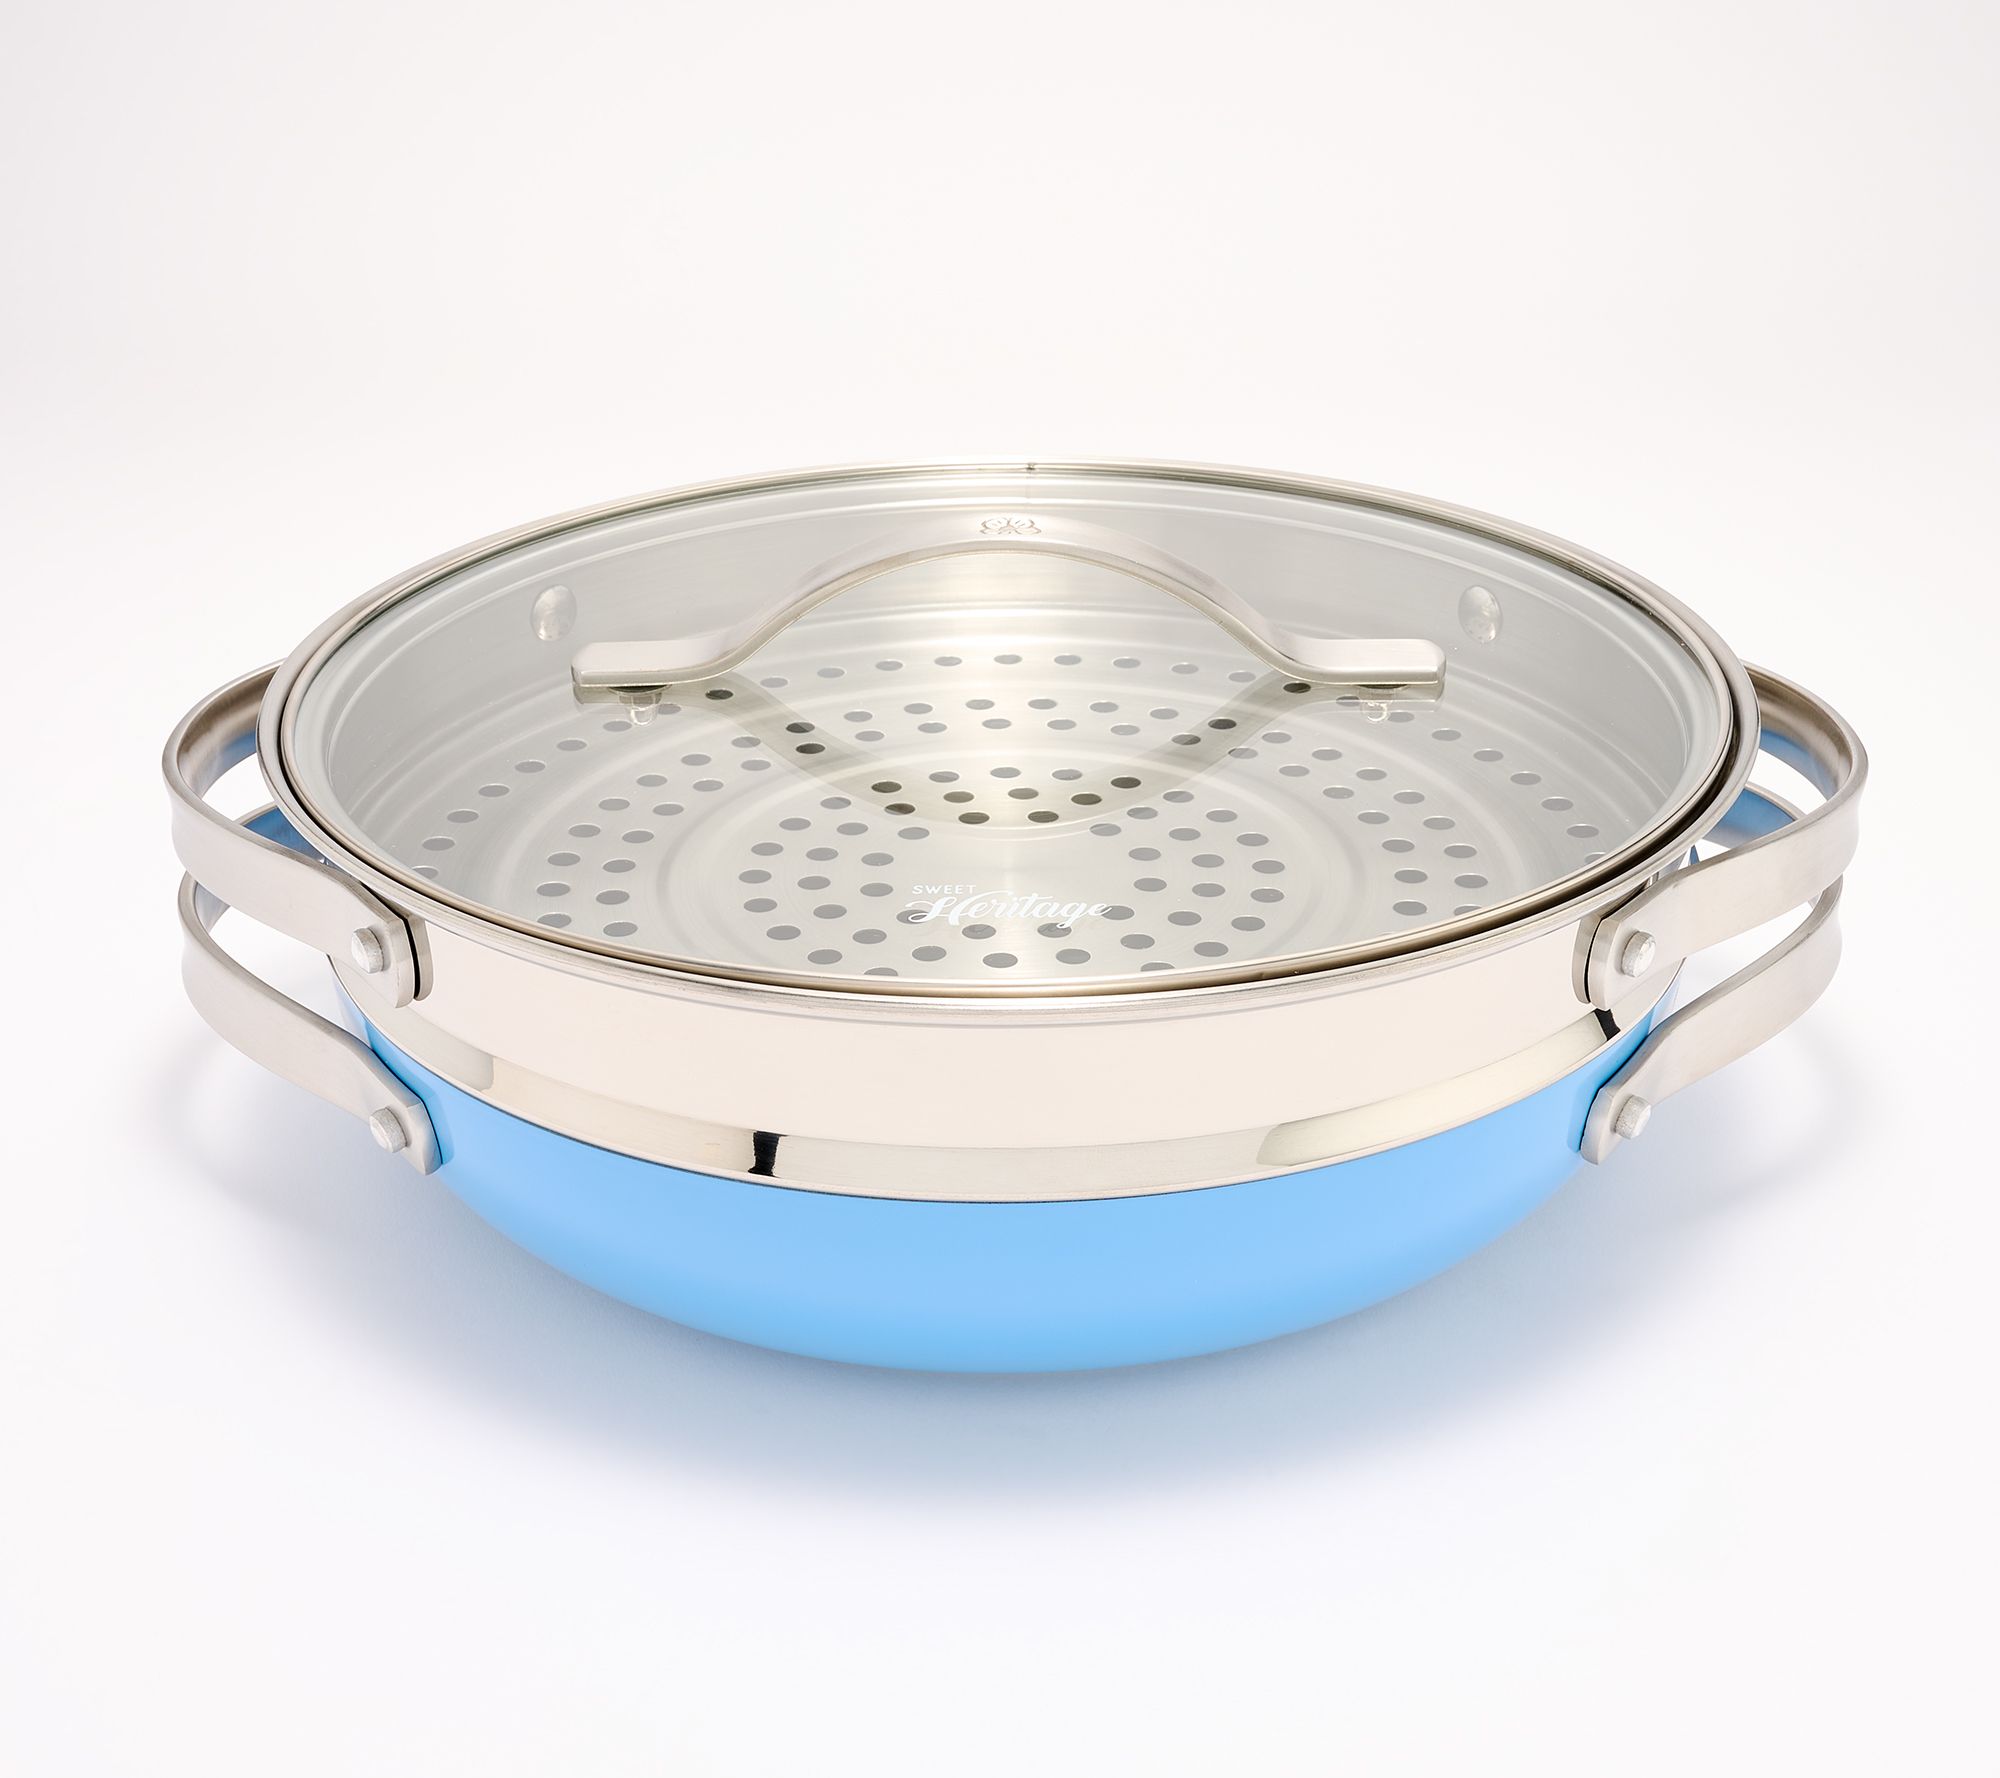 Pampered Chef - Our All-Purpose Pot and Steamer Set is ideal for